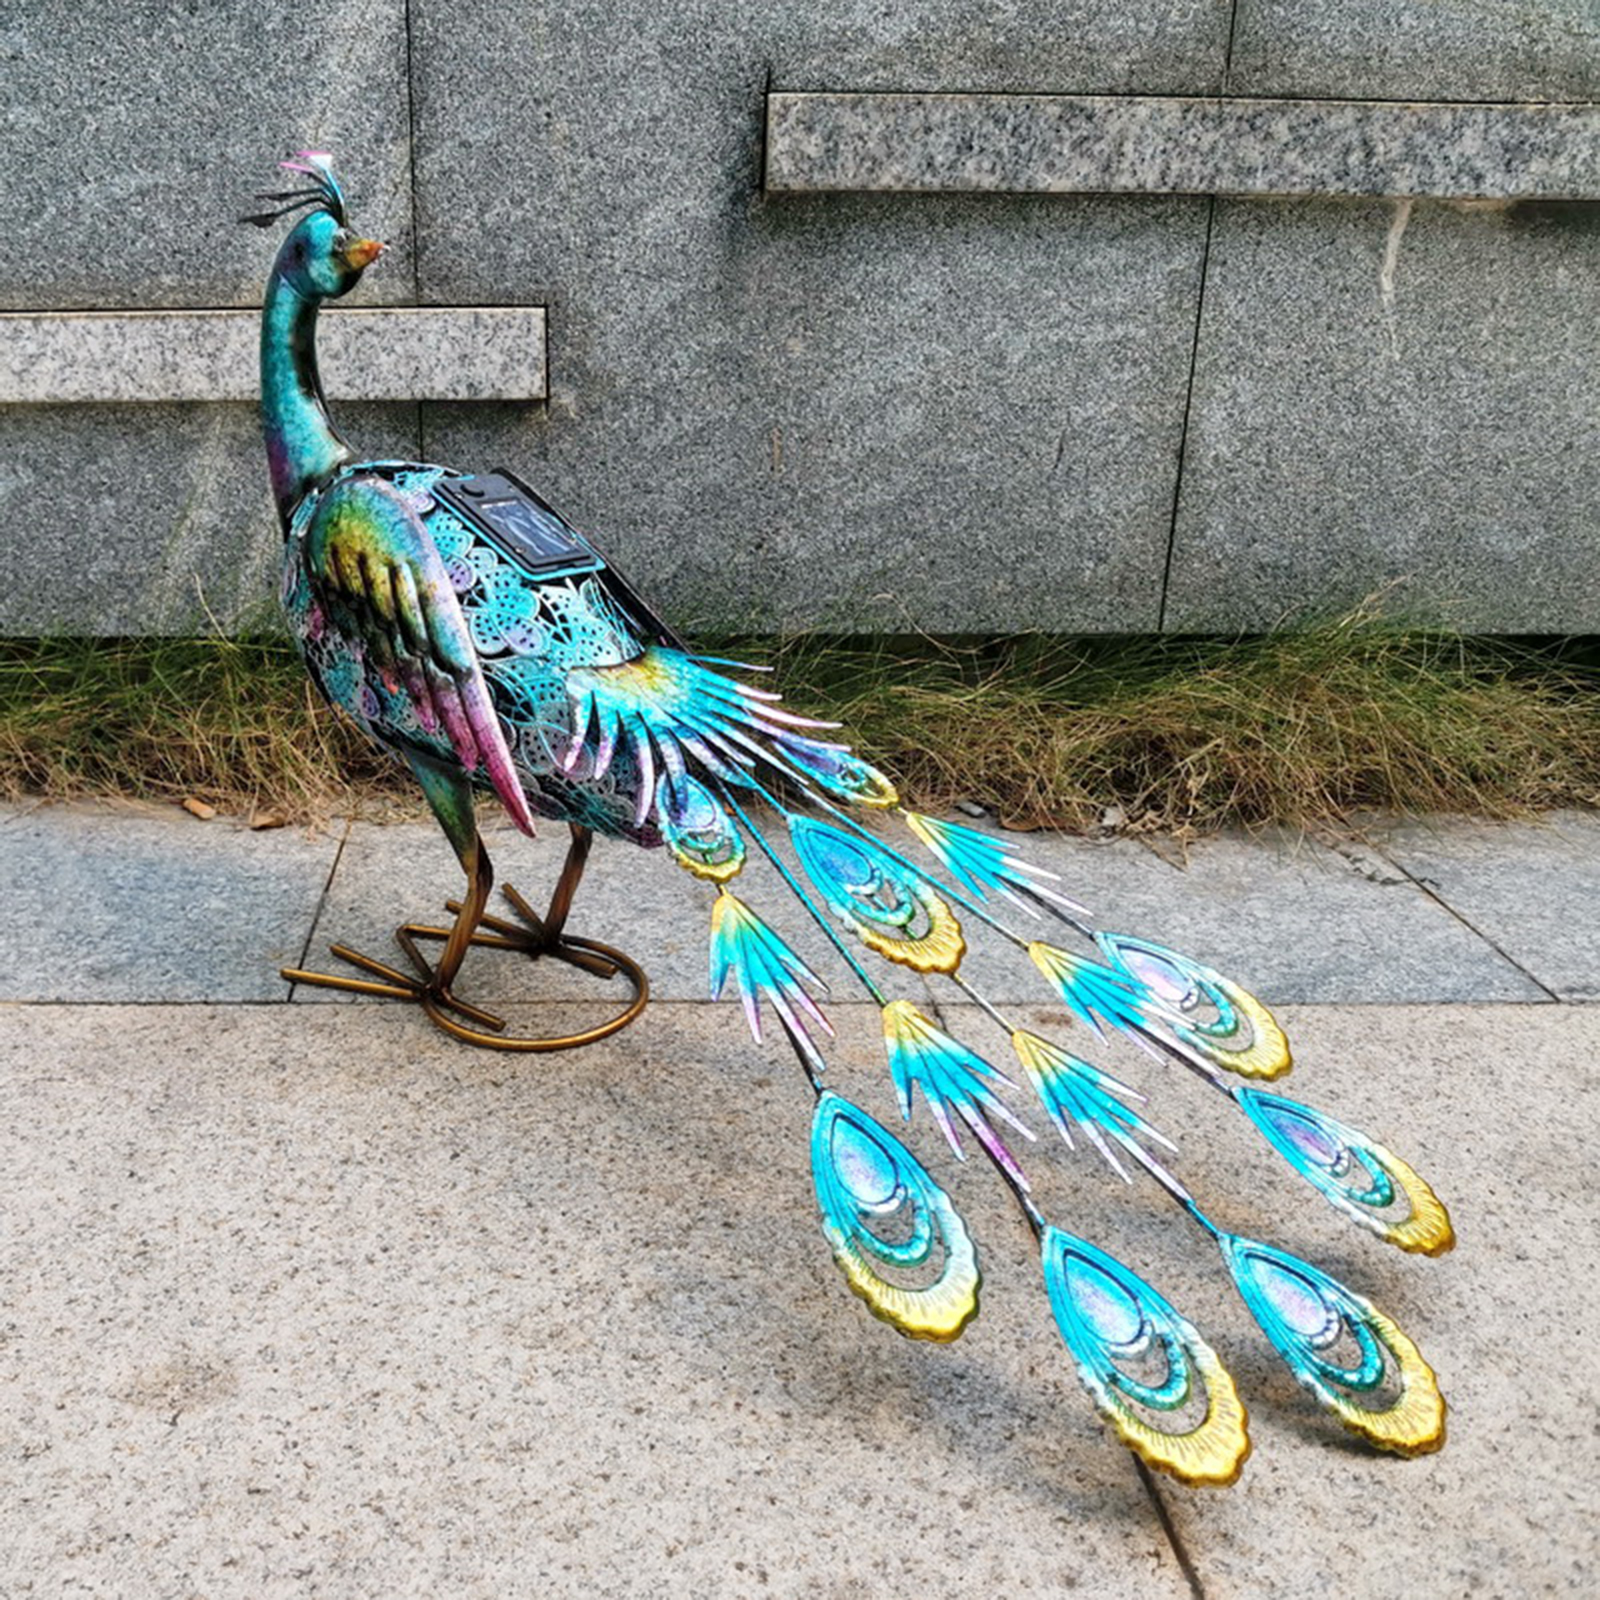 Hapeisy Peacock Garden Statues and Figurines with Solar Lights, Metal Peacock Decor Garden Decorations, Indoor and Outdoor Sculpture for Patio, Yard